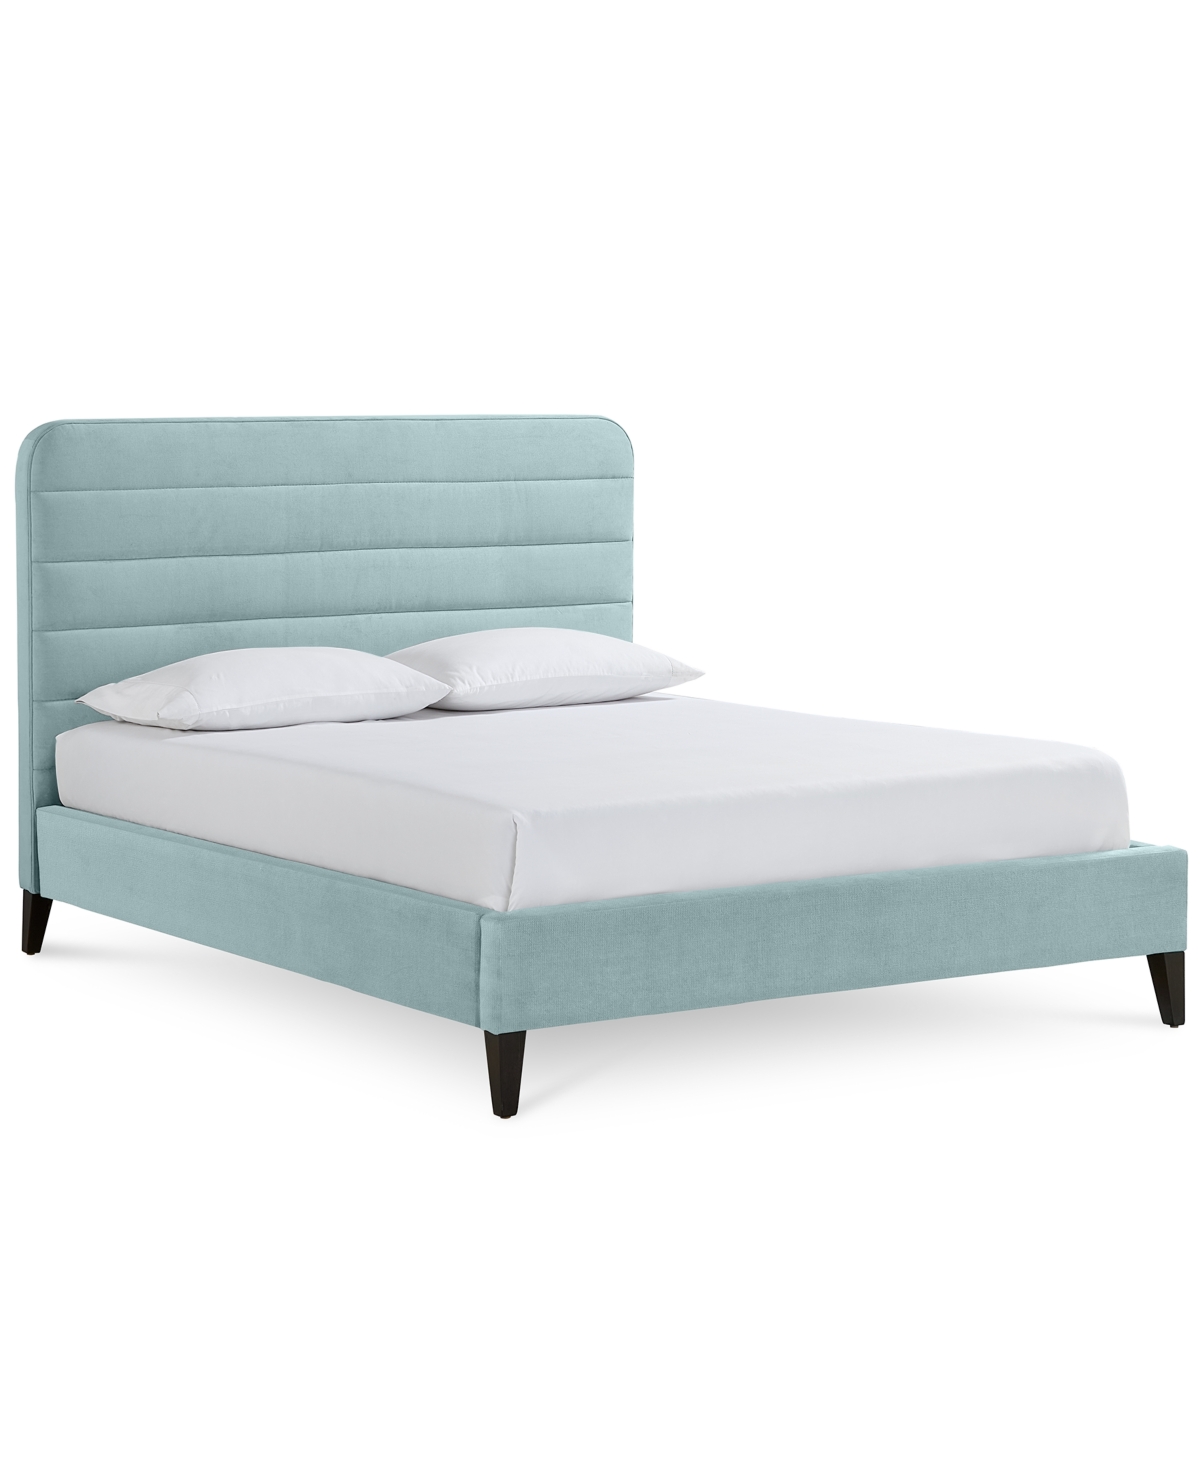 Furniture Haryan Upholstered Twin Bed In Quarny